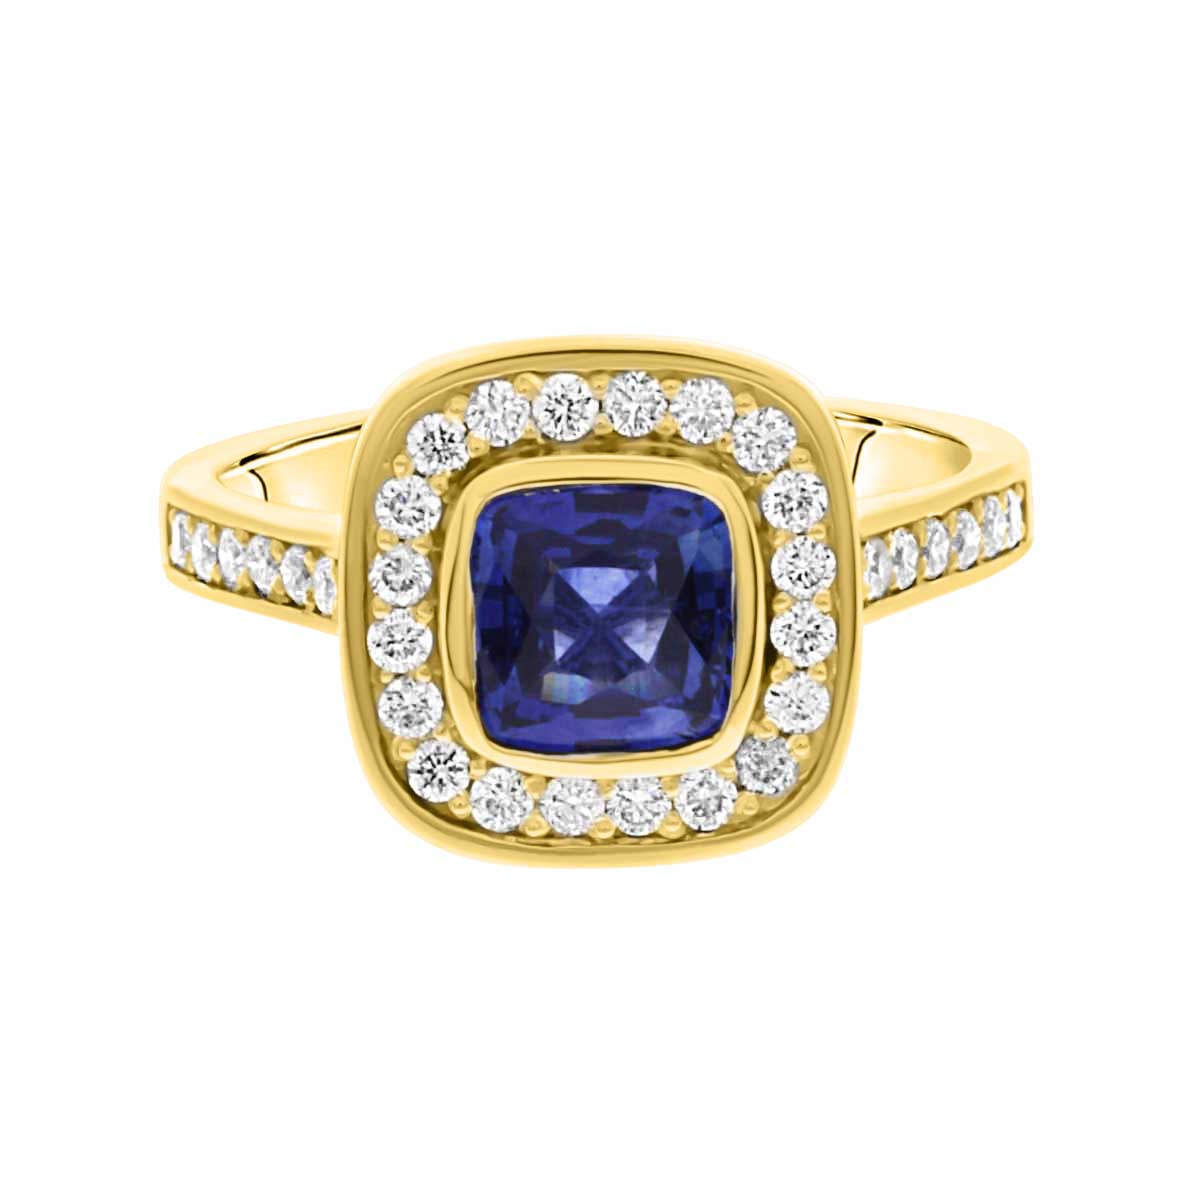 Sapphire Diamond Engagement Ring in yellow gold